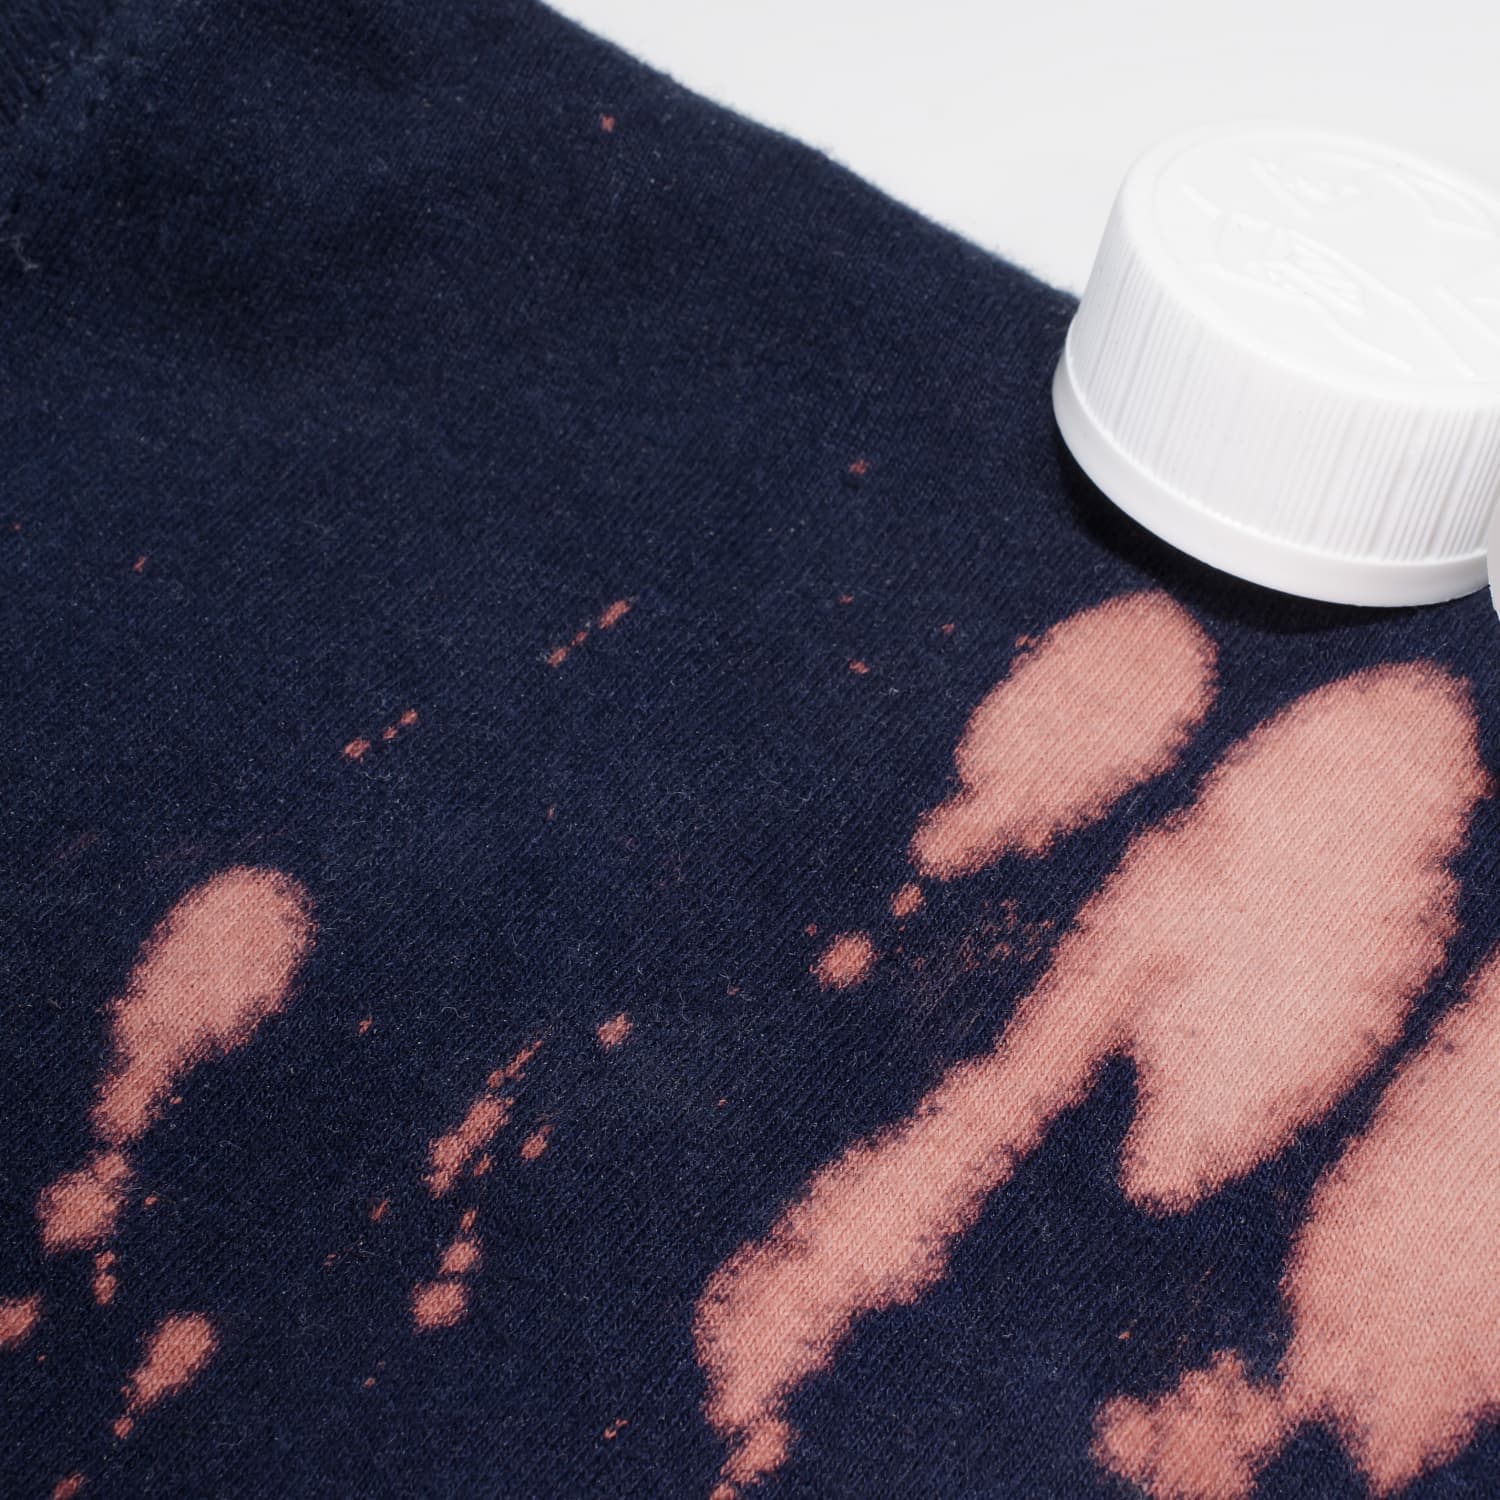 How to Get Bleach Stains Out of Clothes: 5 Remedies to Try